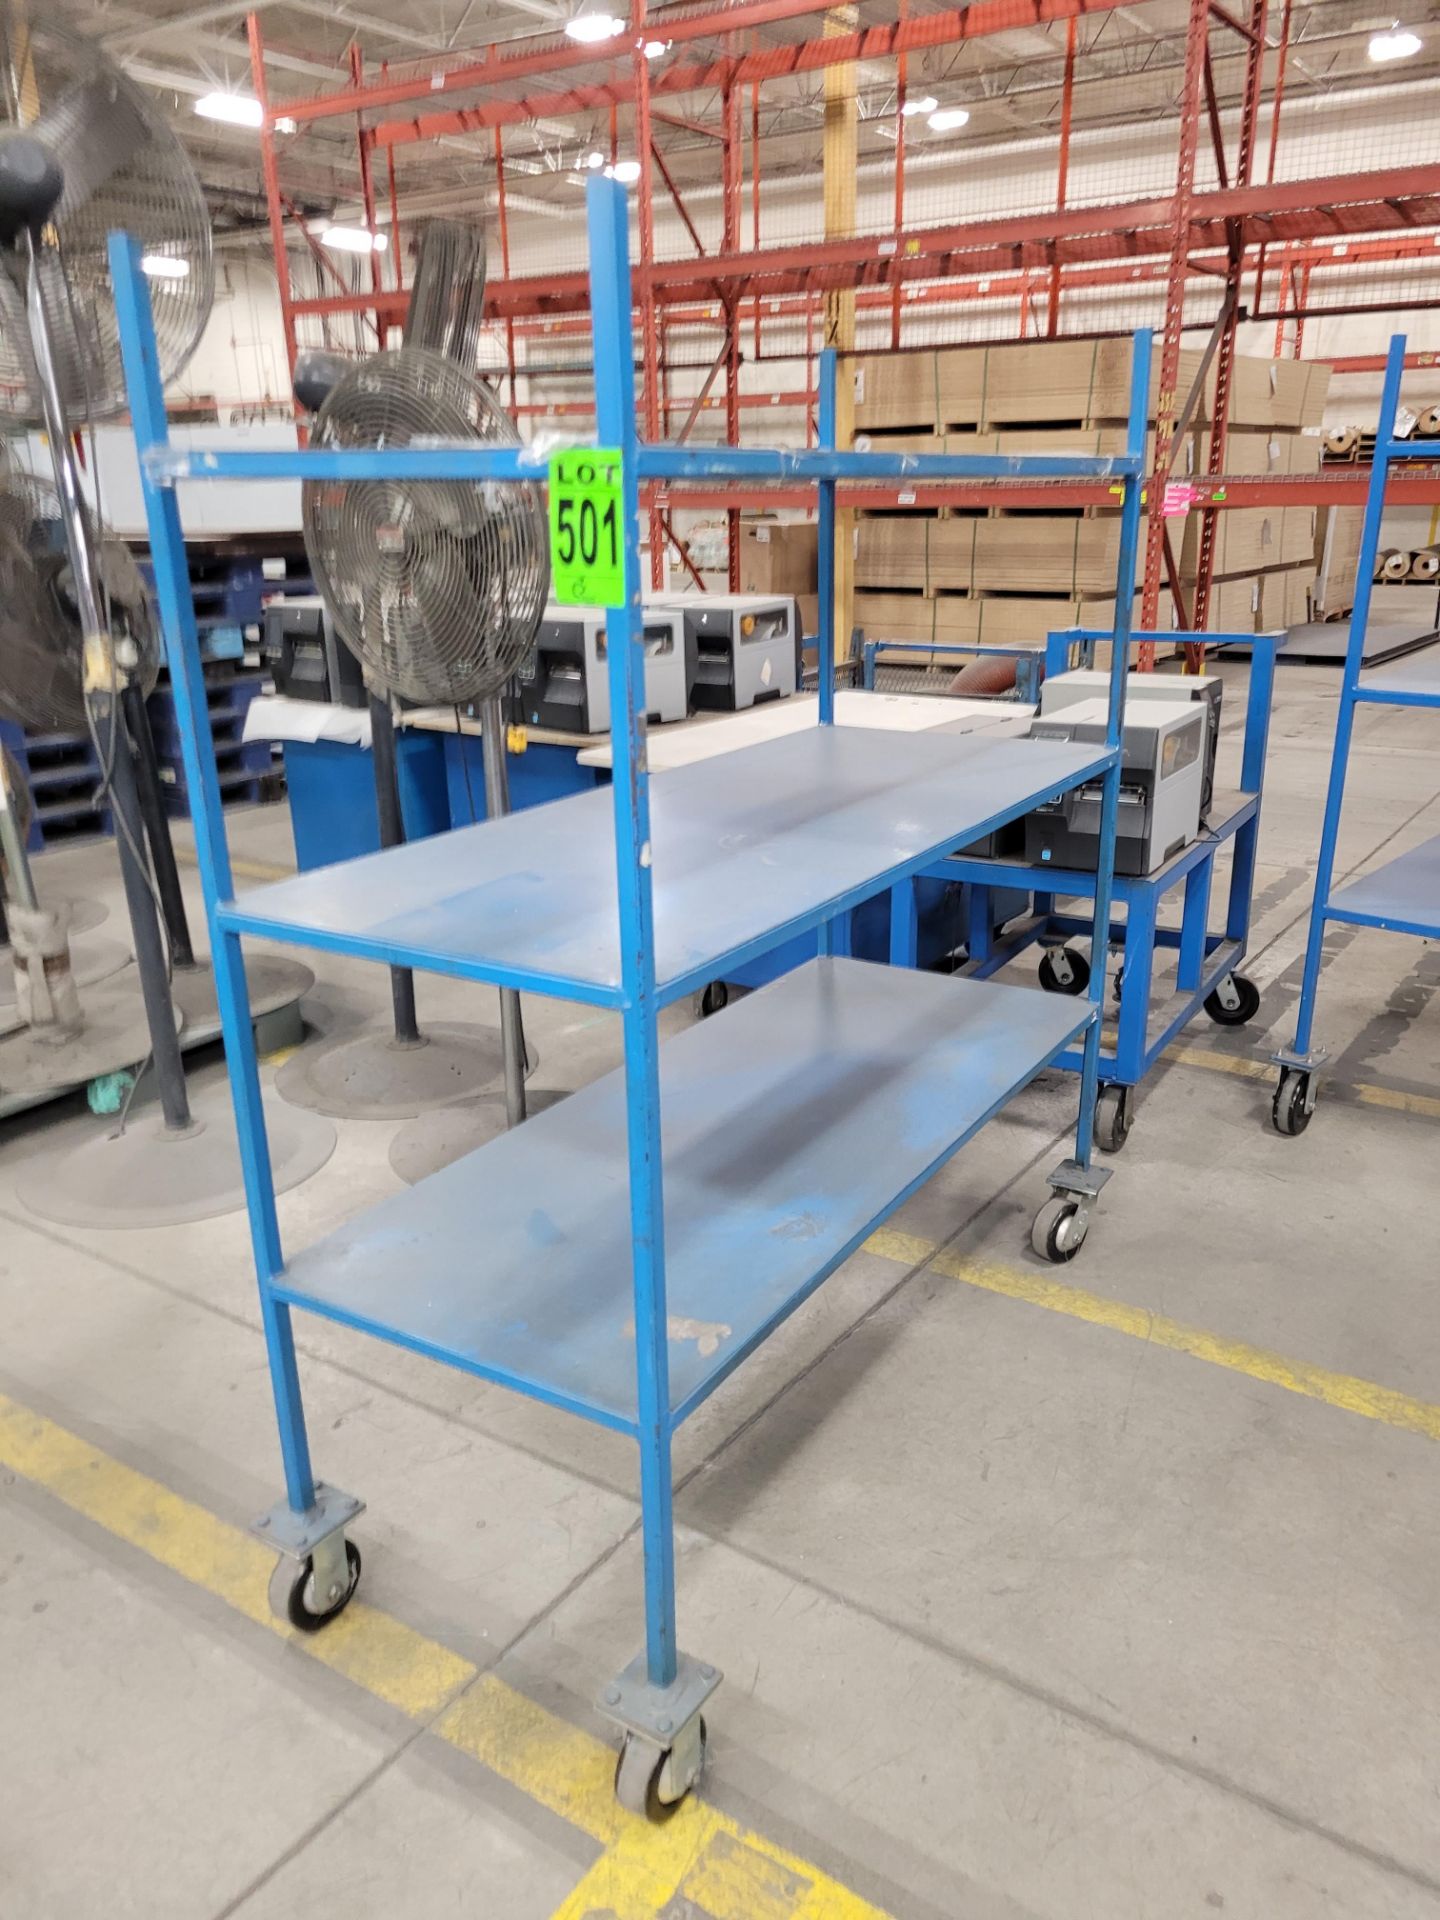 3-level mobile steel shelving unit on casters, 2' x 5' x 5' w/handles